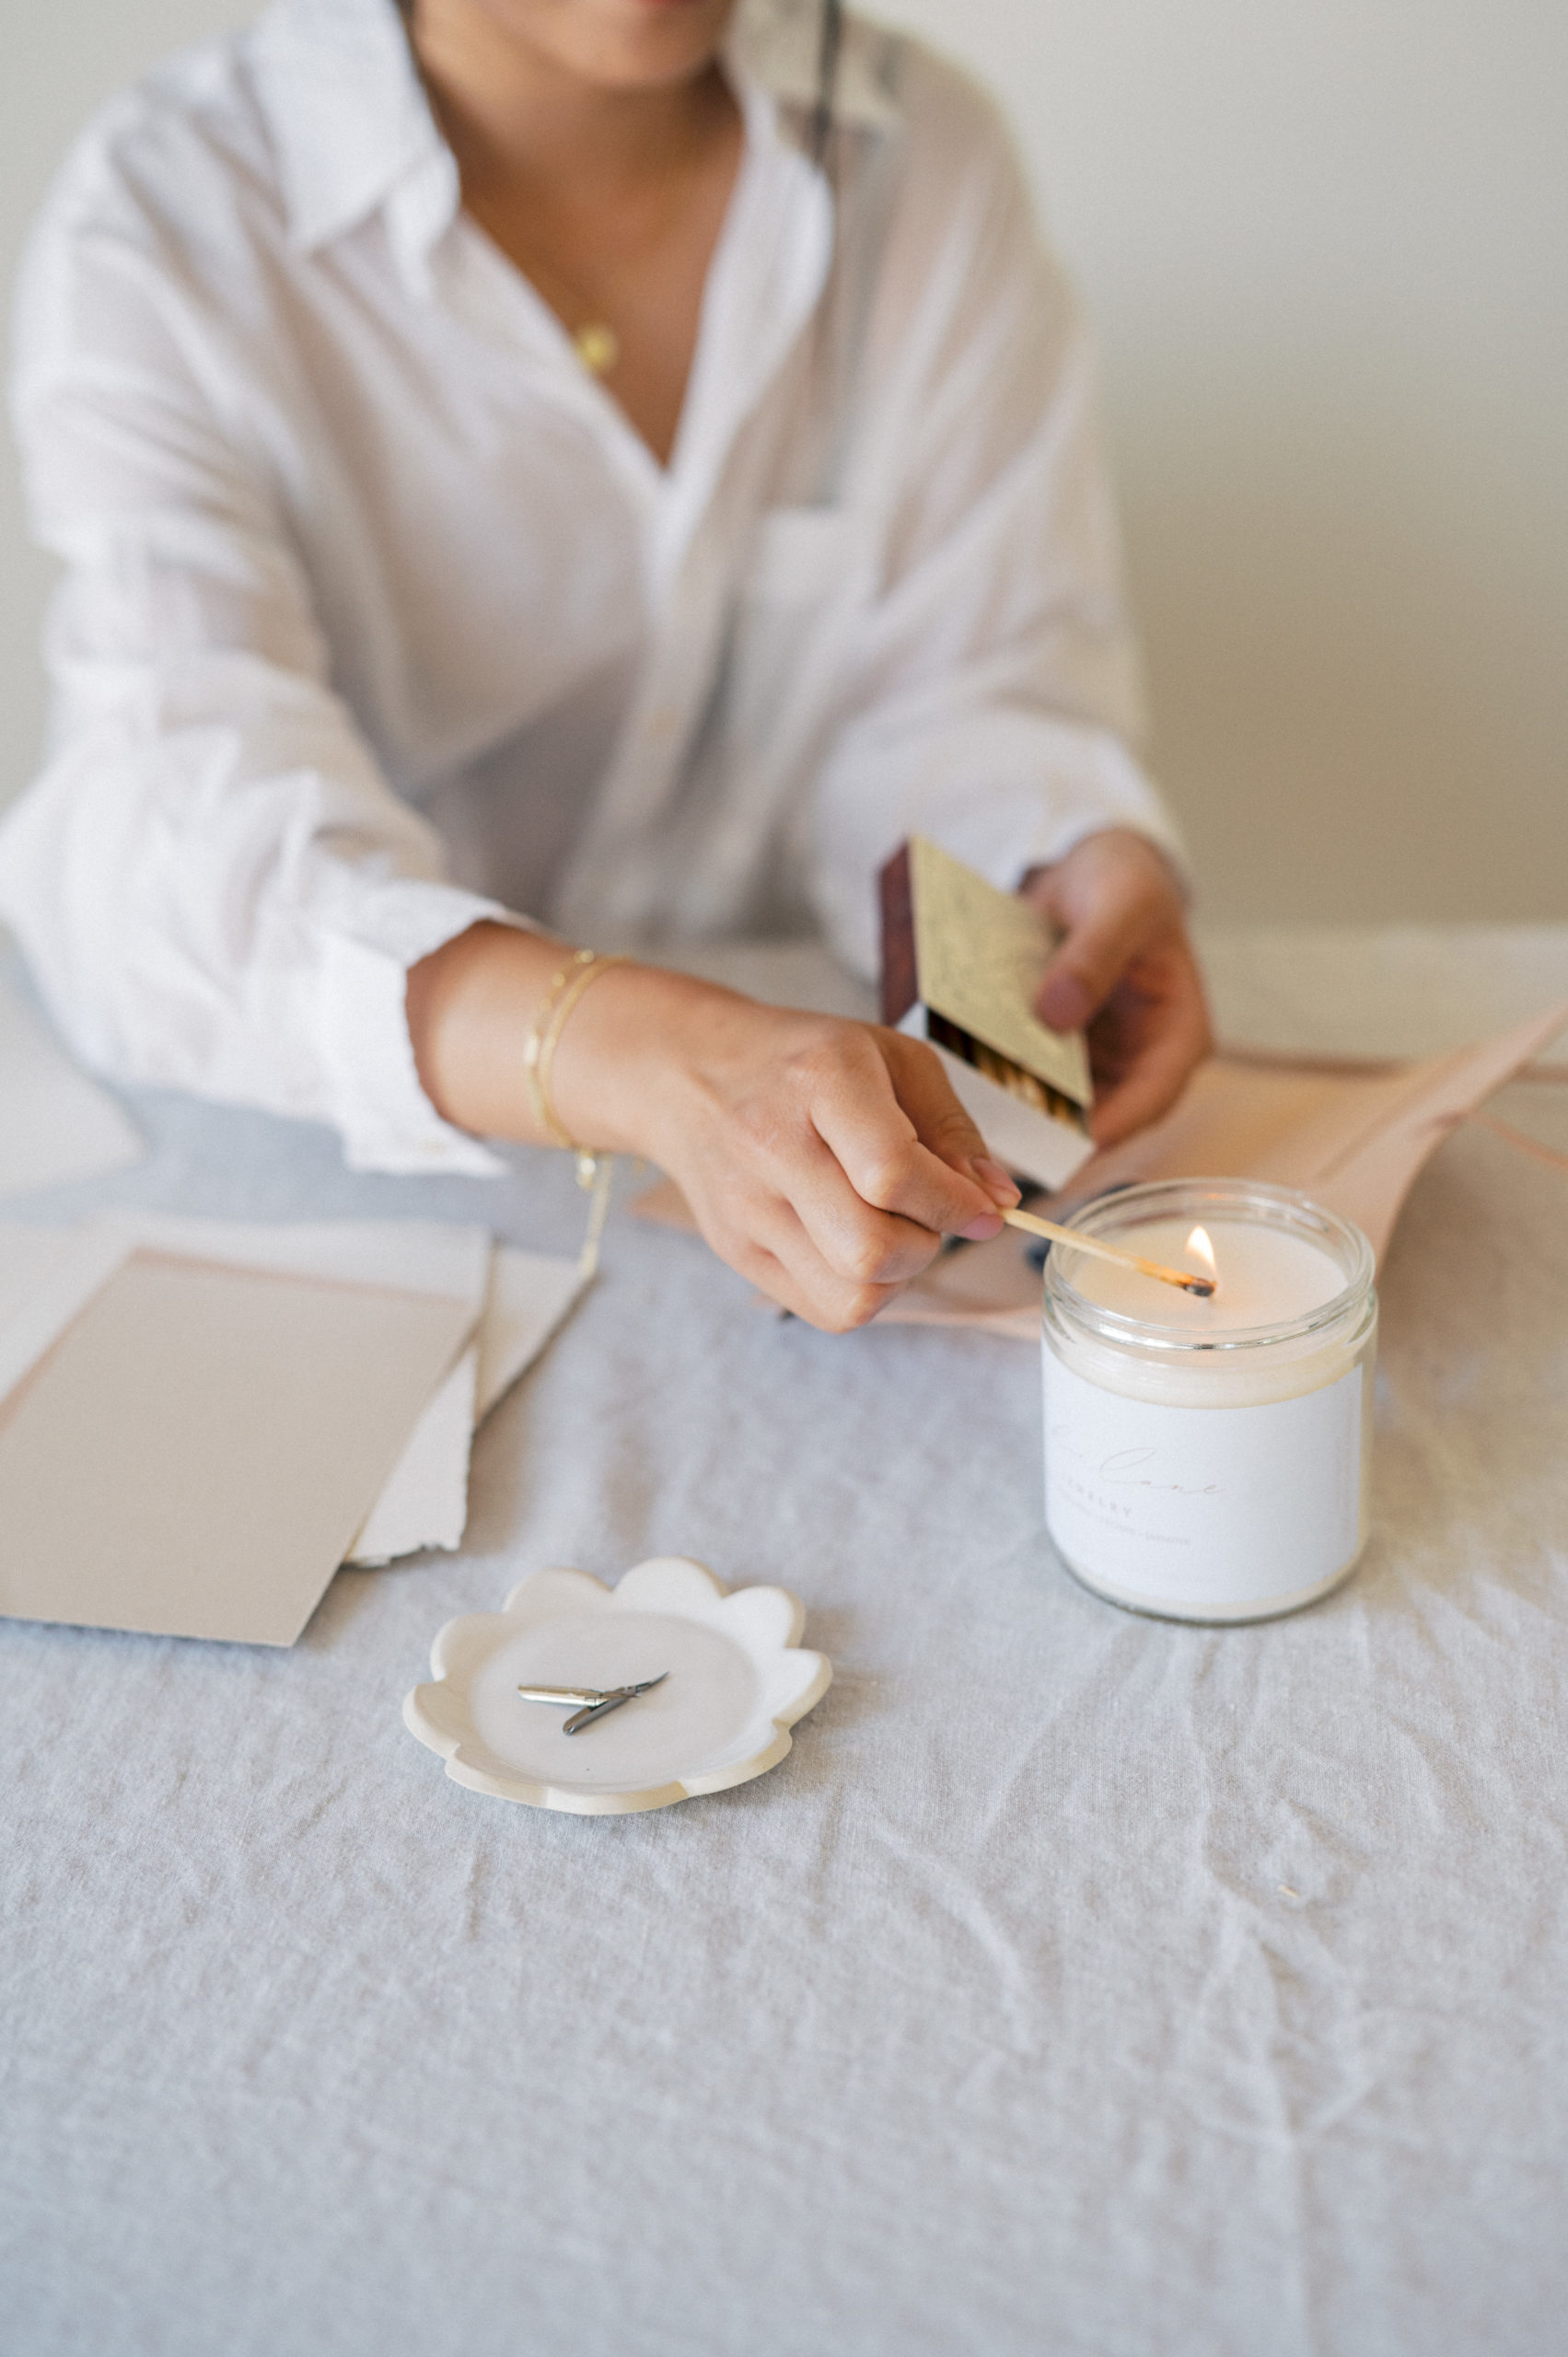 Edmonton Personal Branding Photography  Upclose of woman wearing white button up shirt lighting a white candle on a linen covered table